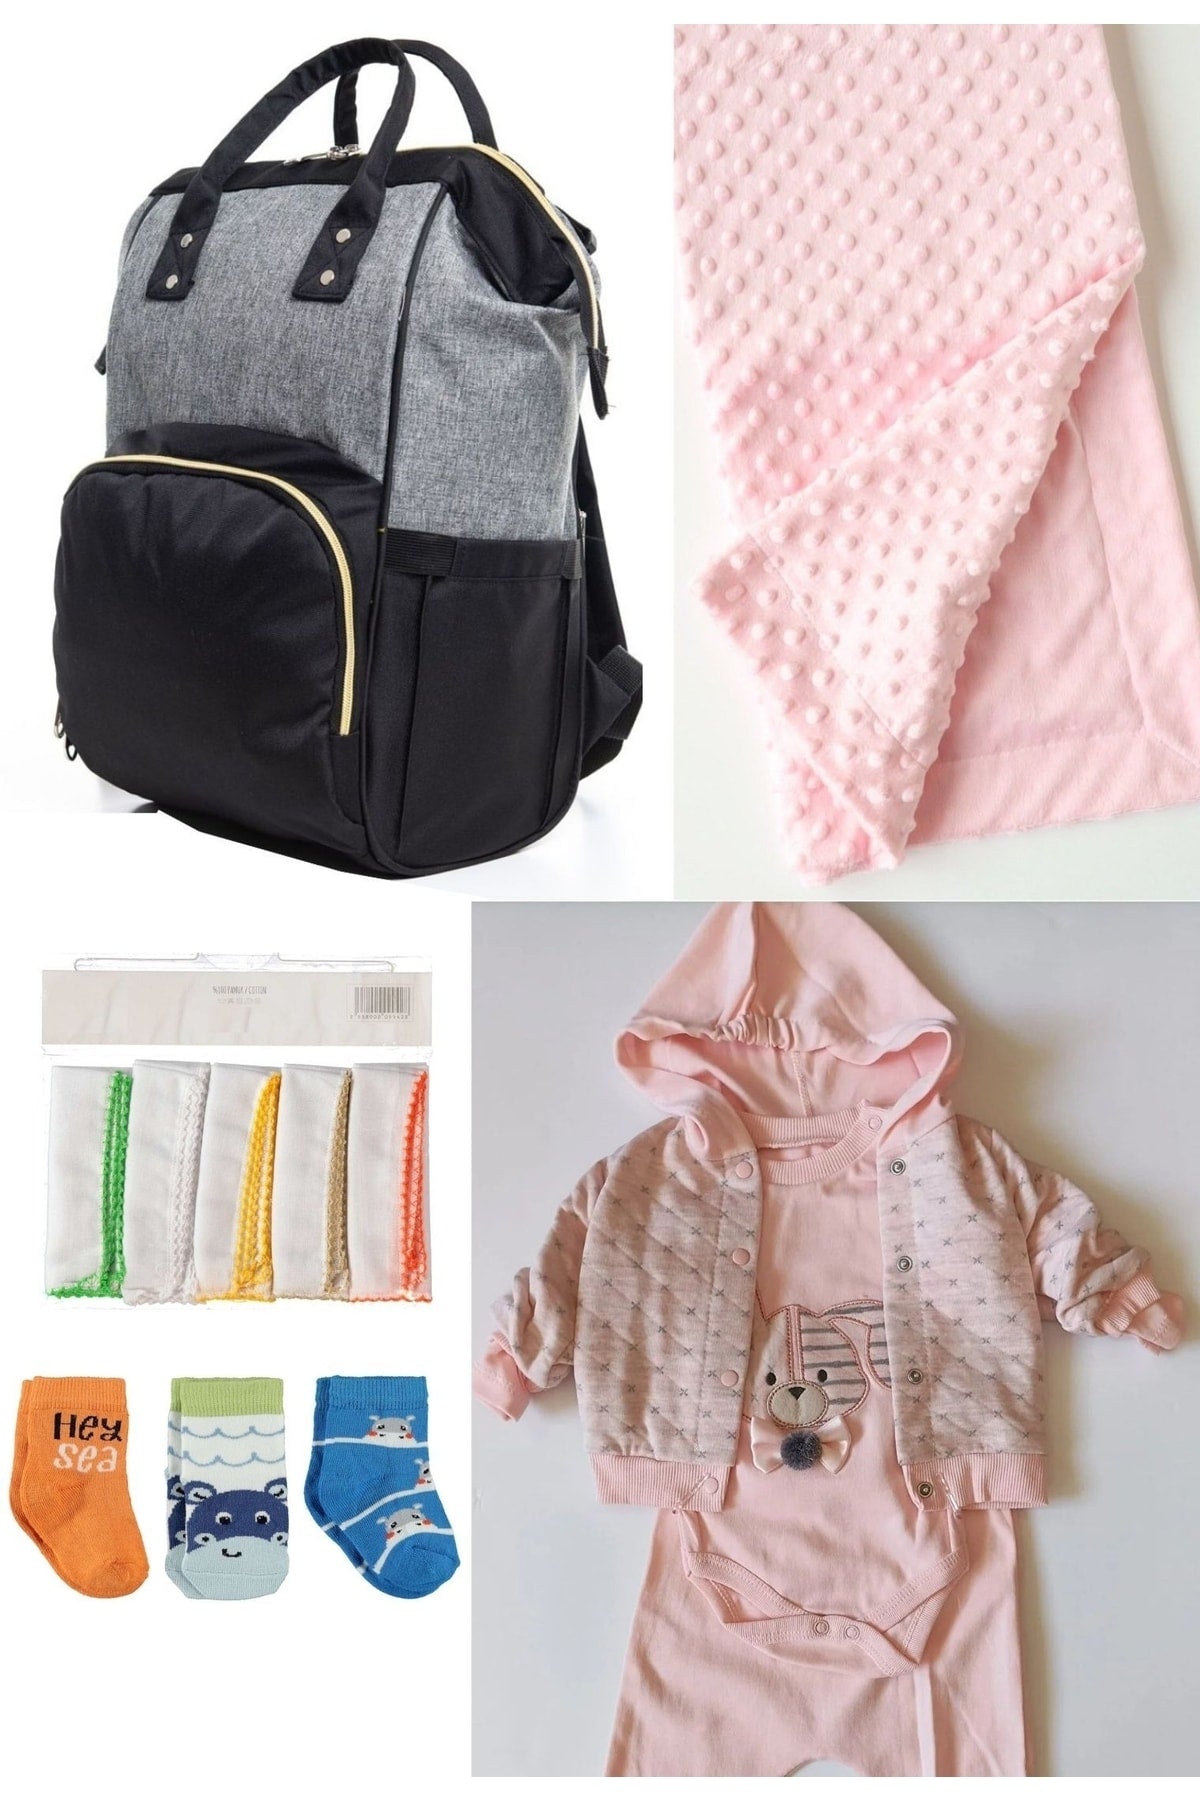 5 Piece Maternity Set (Baby Care Backpack, Hospital Exit, Chickpea Blanket, 10 Wipes and 3 Socks)